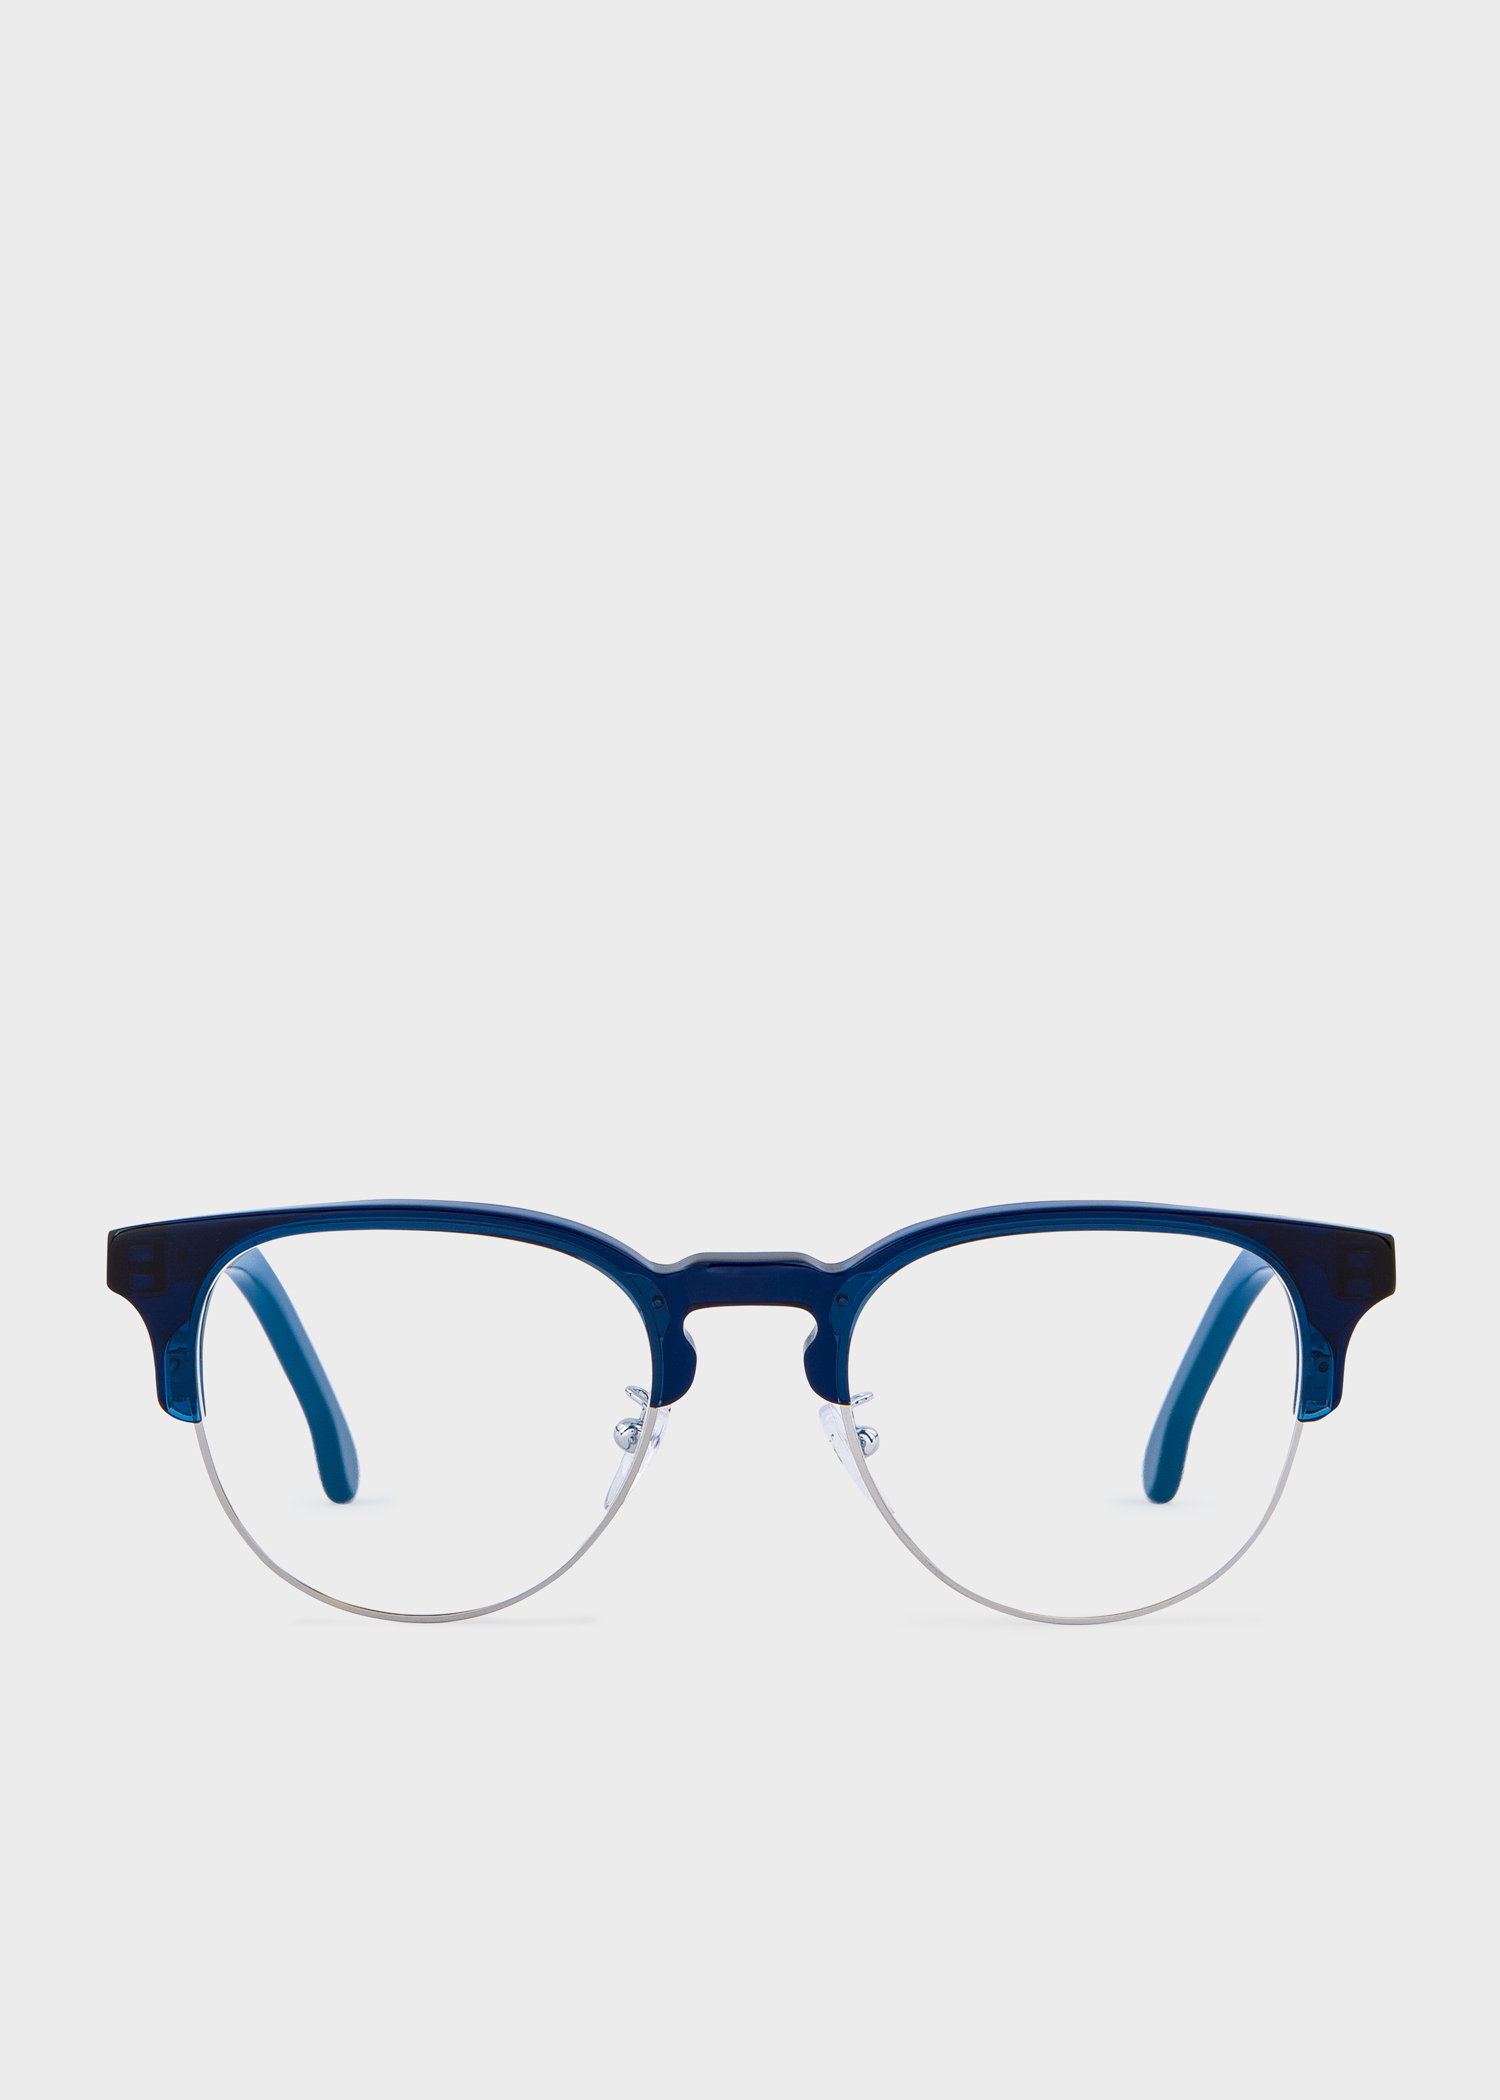 Front view - Paul Smith Deep Navy 'Birch' Spectacles